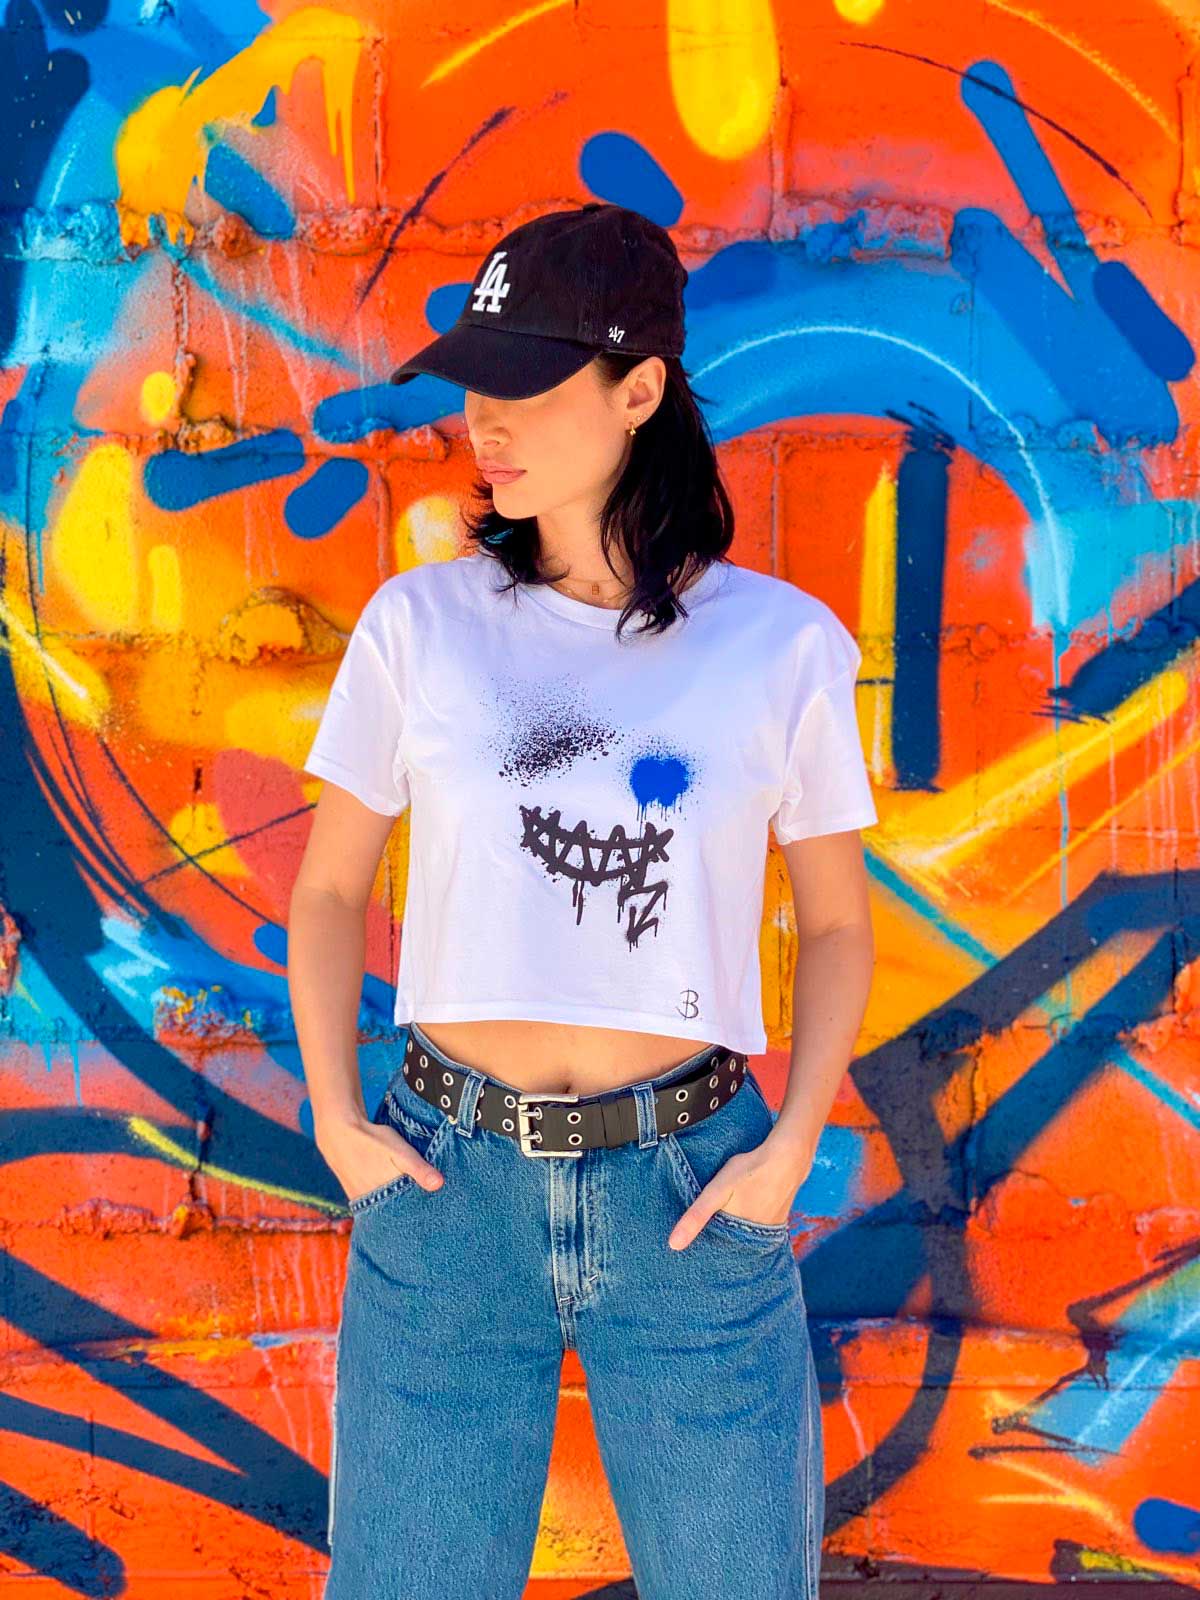 Bridget Models her Smile Crop Top Tee Print Design against a brightly painted wall. Shop B-Contemporary-Streetwear